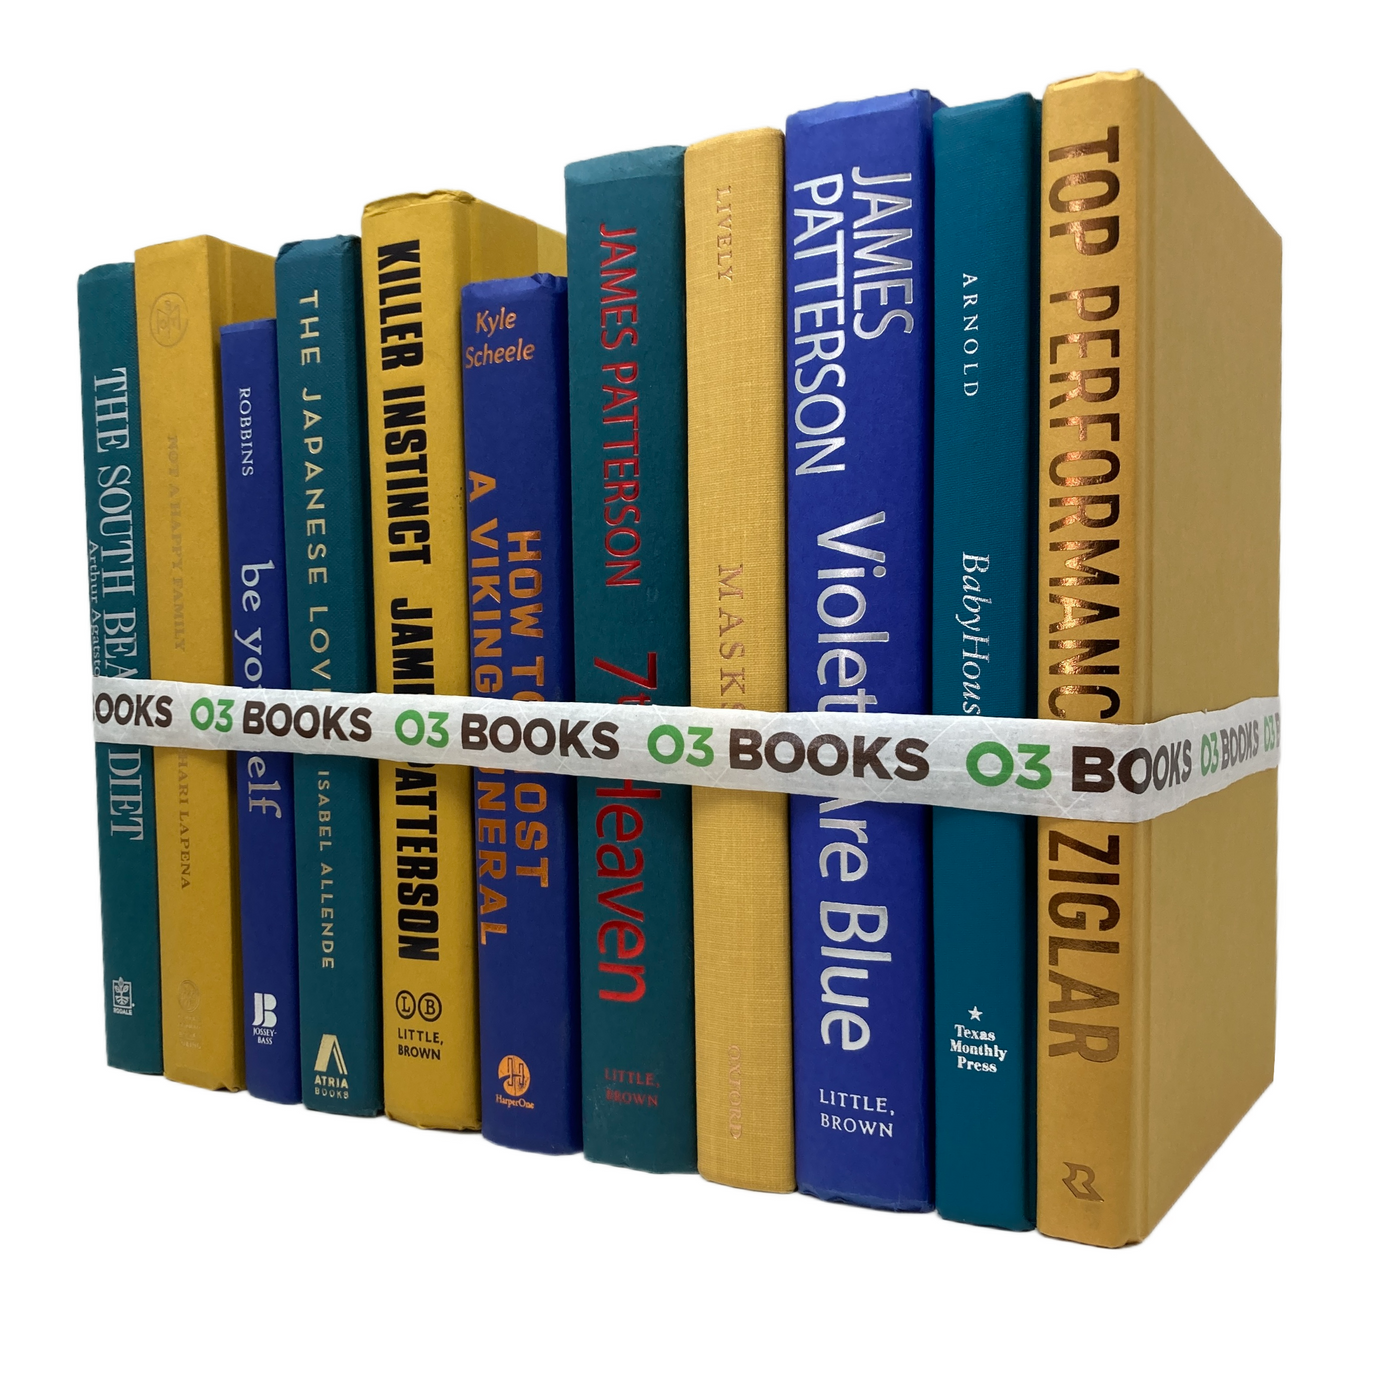 Teal Stone Decorative Books Teal, Yellow and Violet